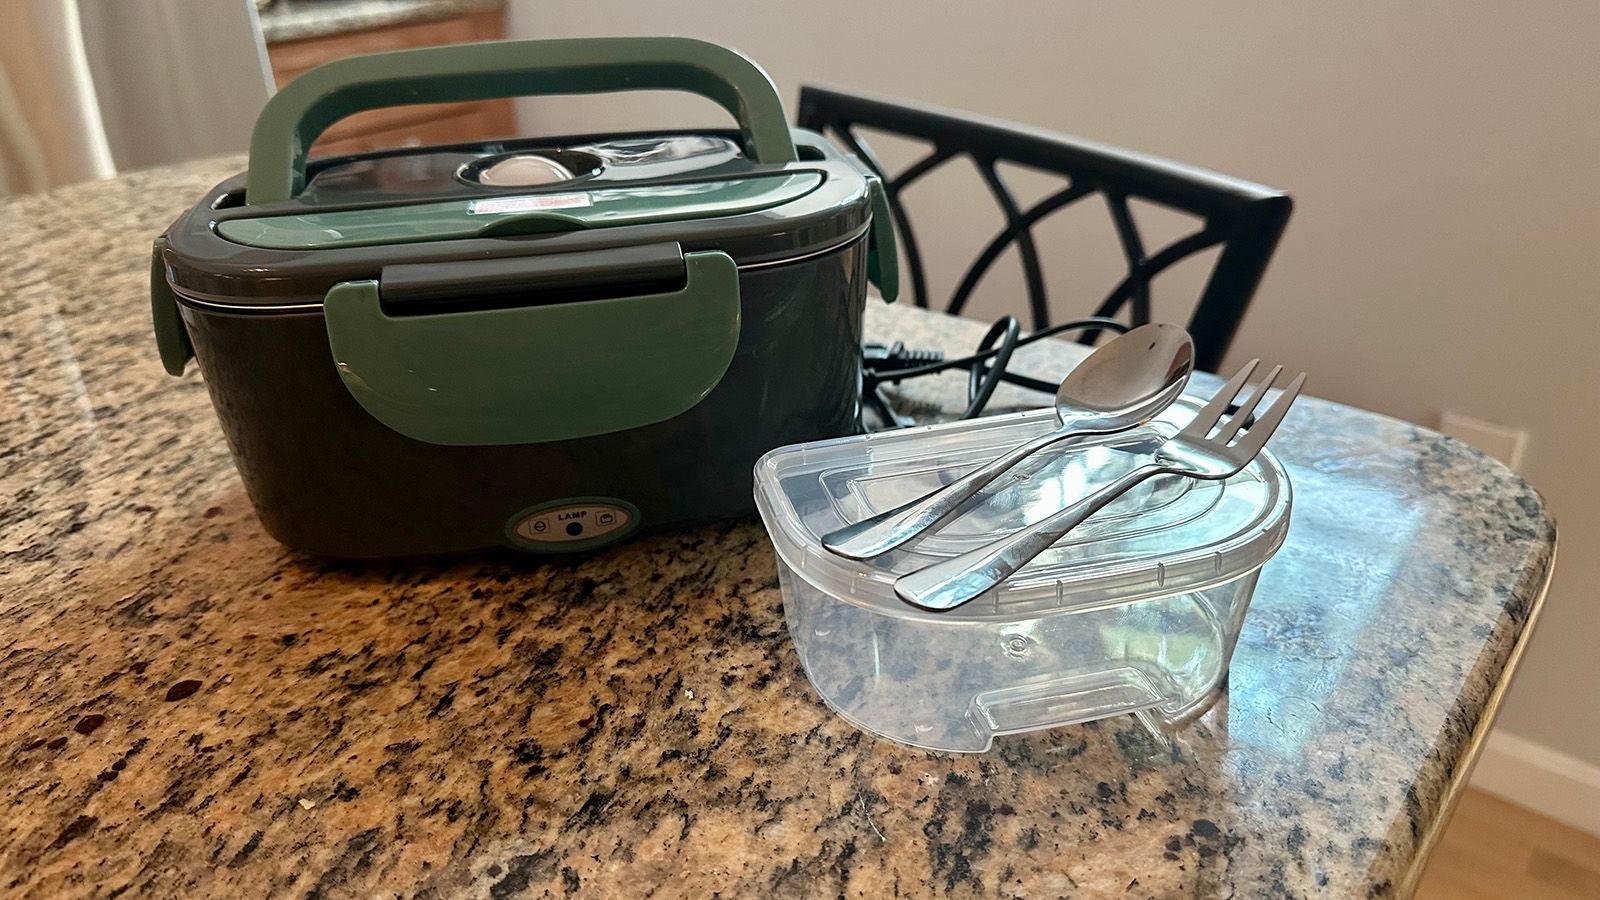 Under $25 scores: Anyone can have a hot lunch with this lunch box food  heater | CNN Underscored